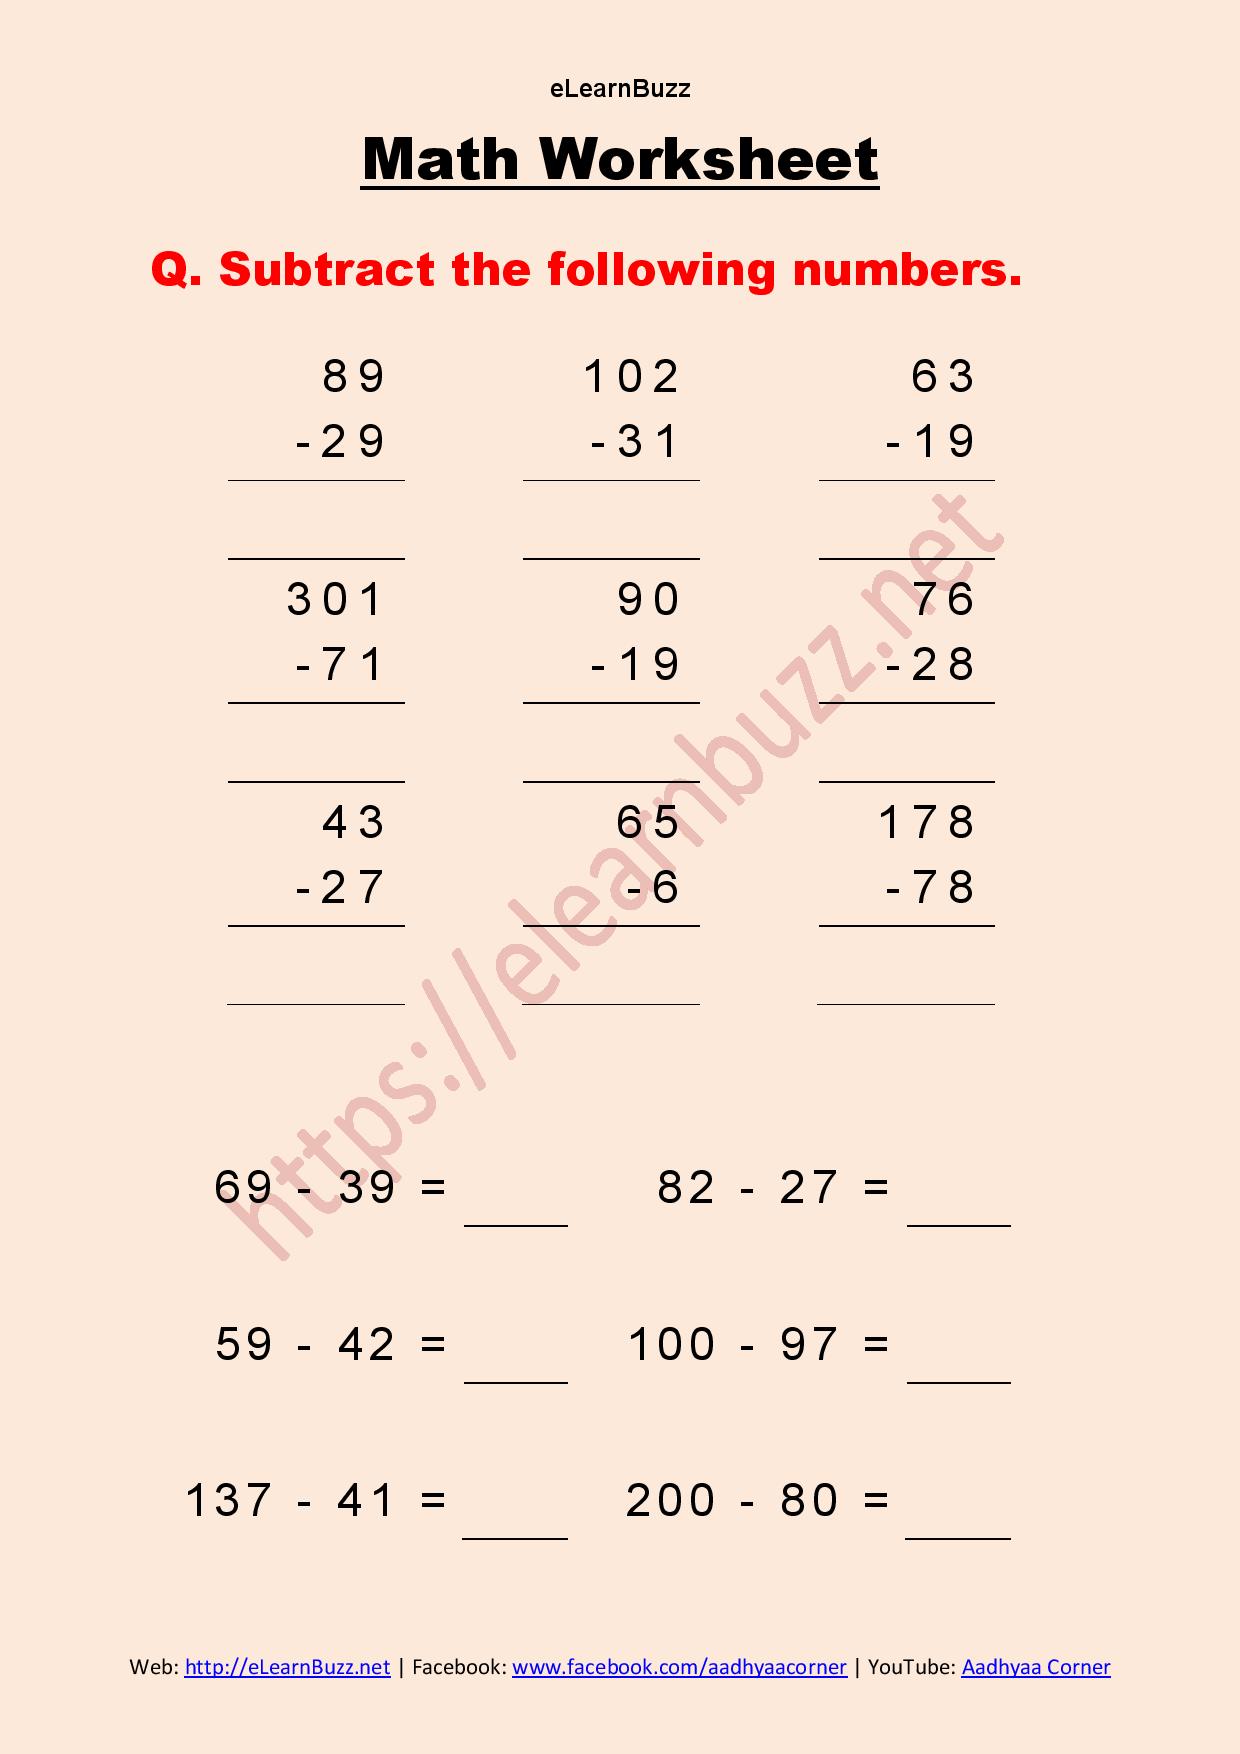 maths-worksheets-for-class-5-worksheetsday